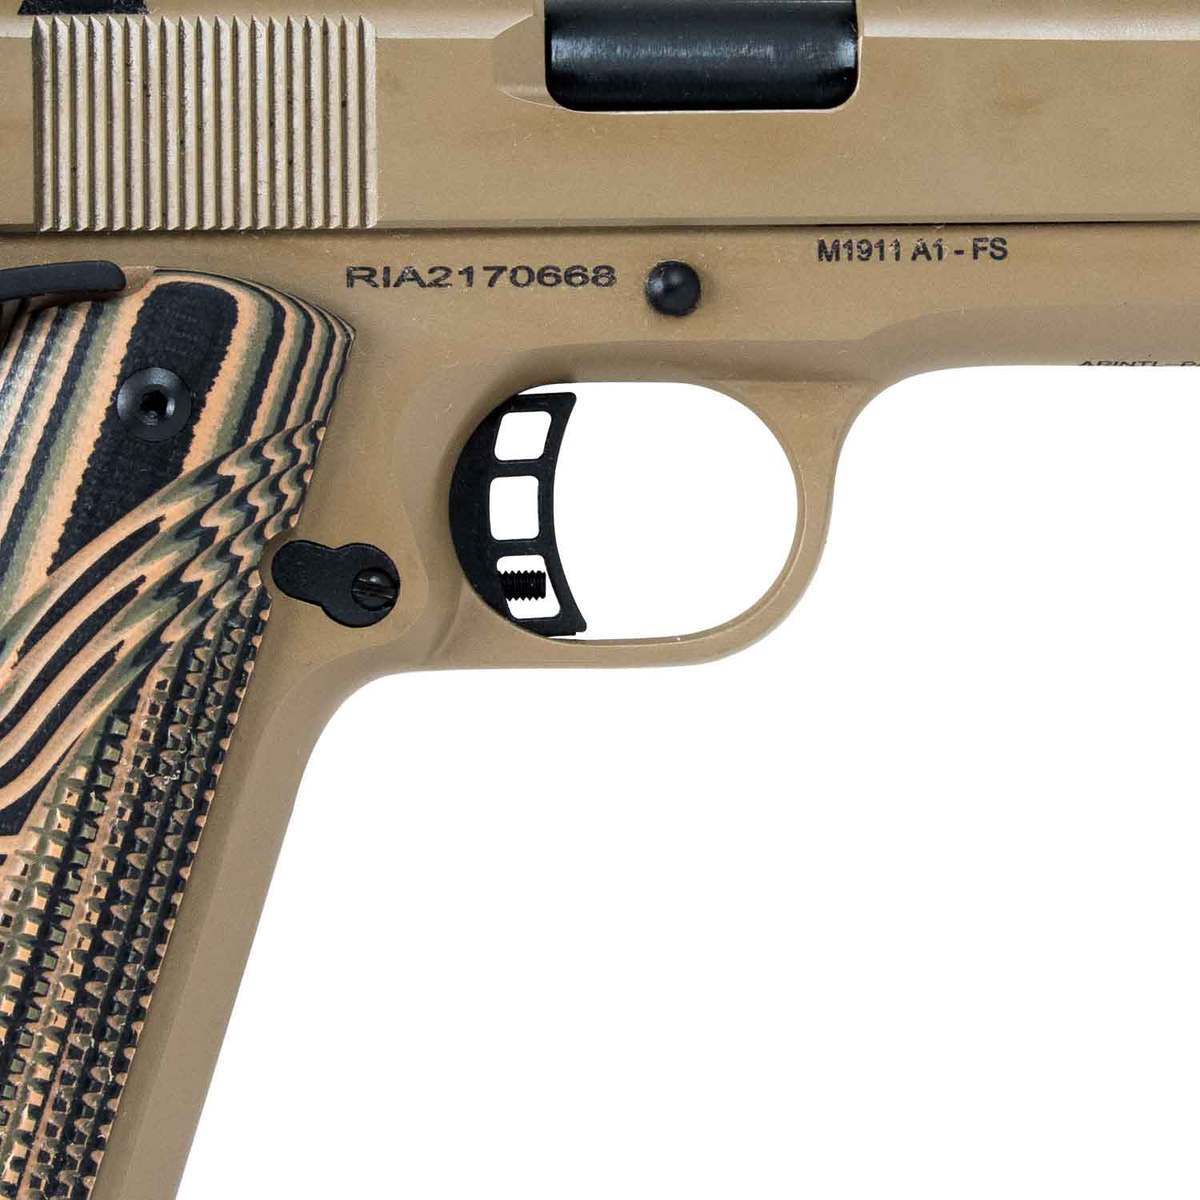 Rock Island M1911 A1 Fs Tactical 45 Auto Acp 5in Camoblack Pistol 81 Rounds Tan 3513